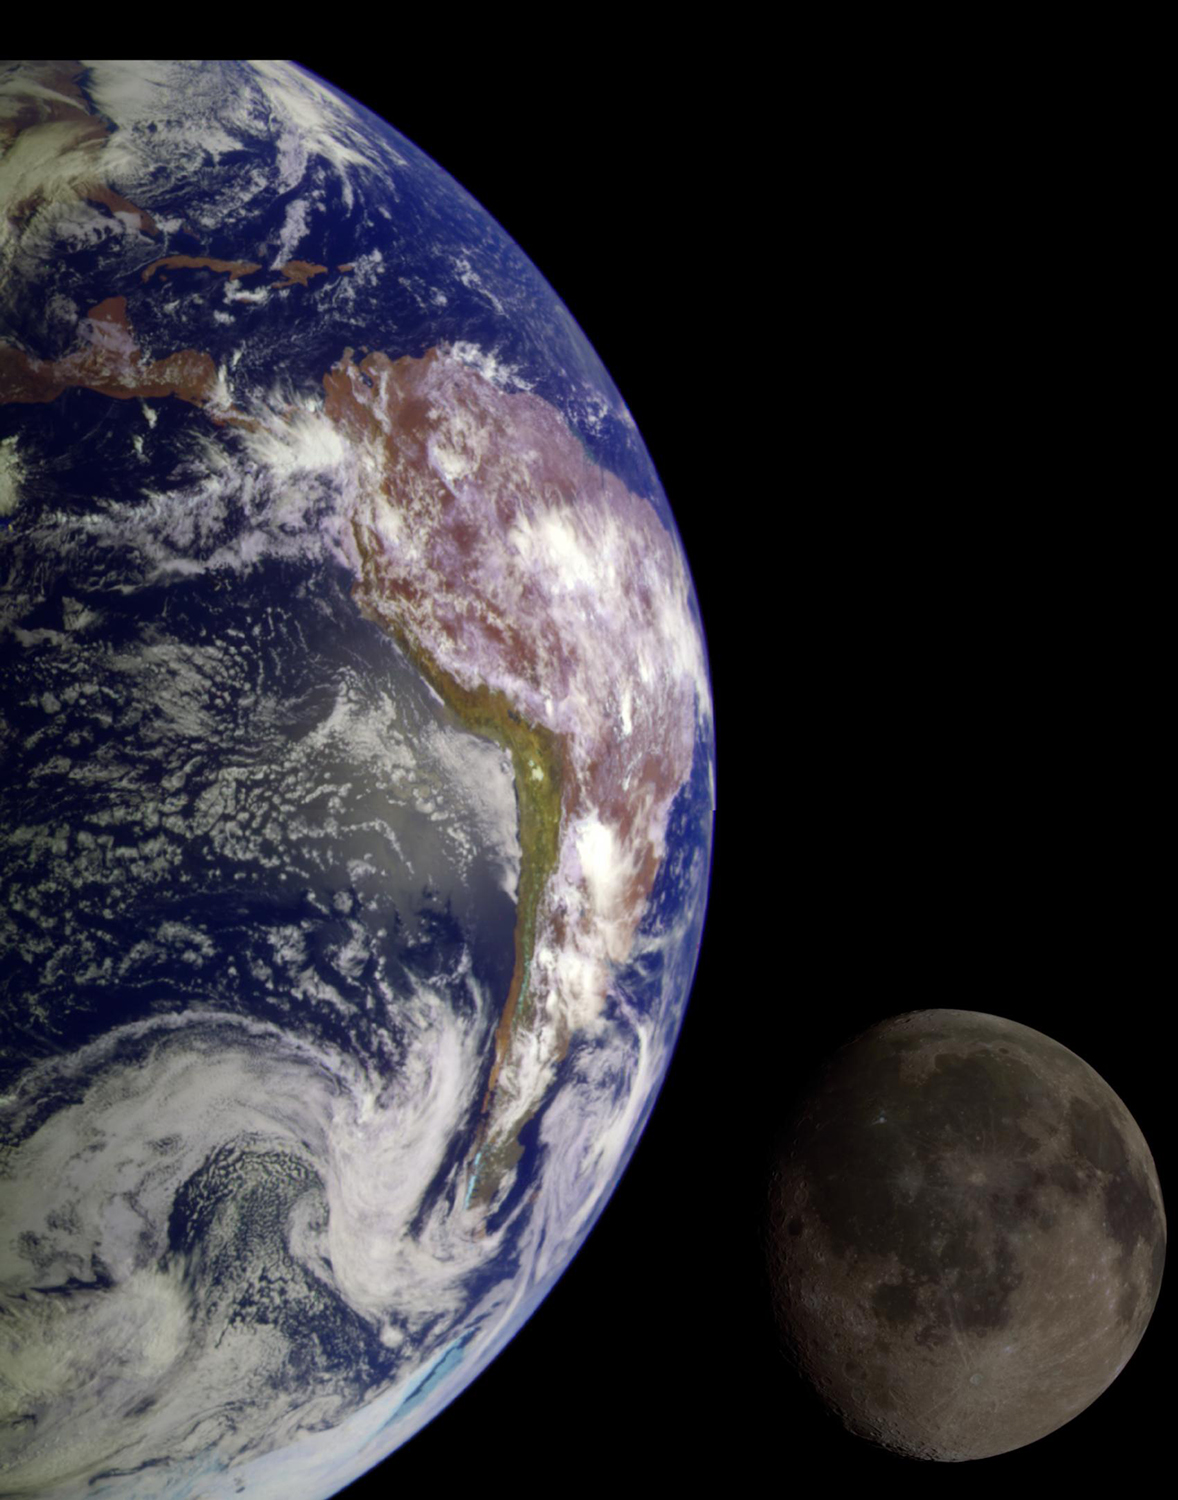 galileo-spacecraft-returned-images-of-the-earth-and-moon.jpg